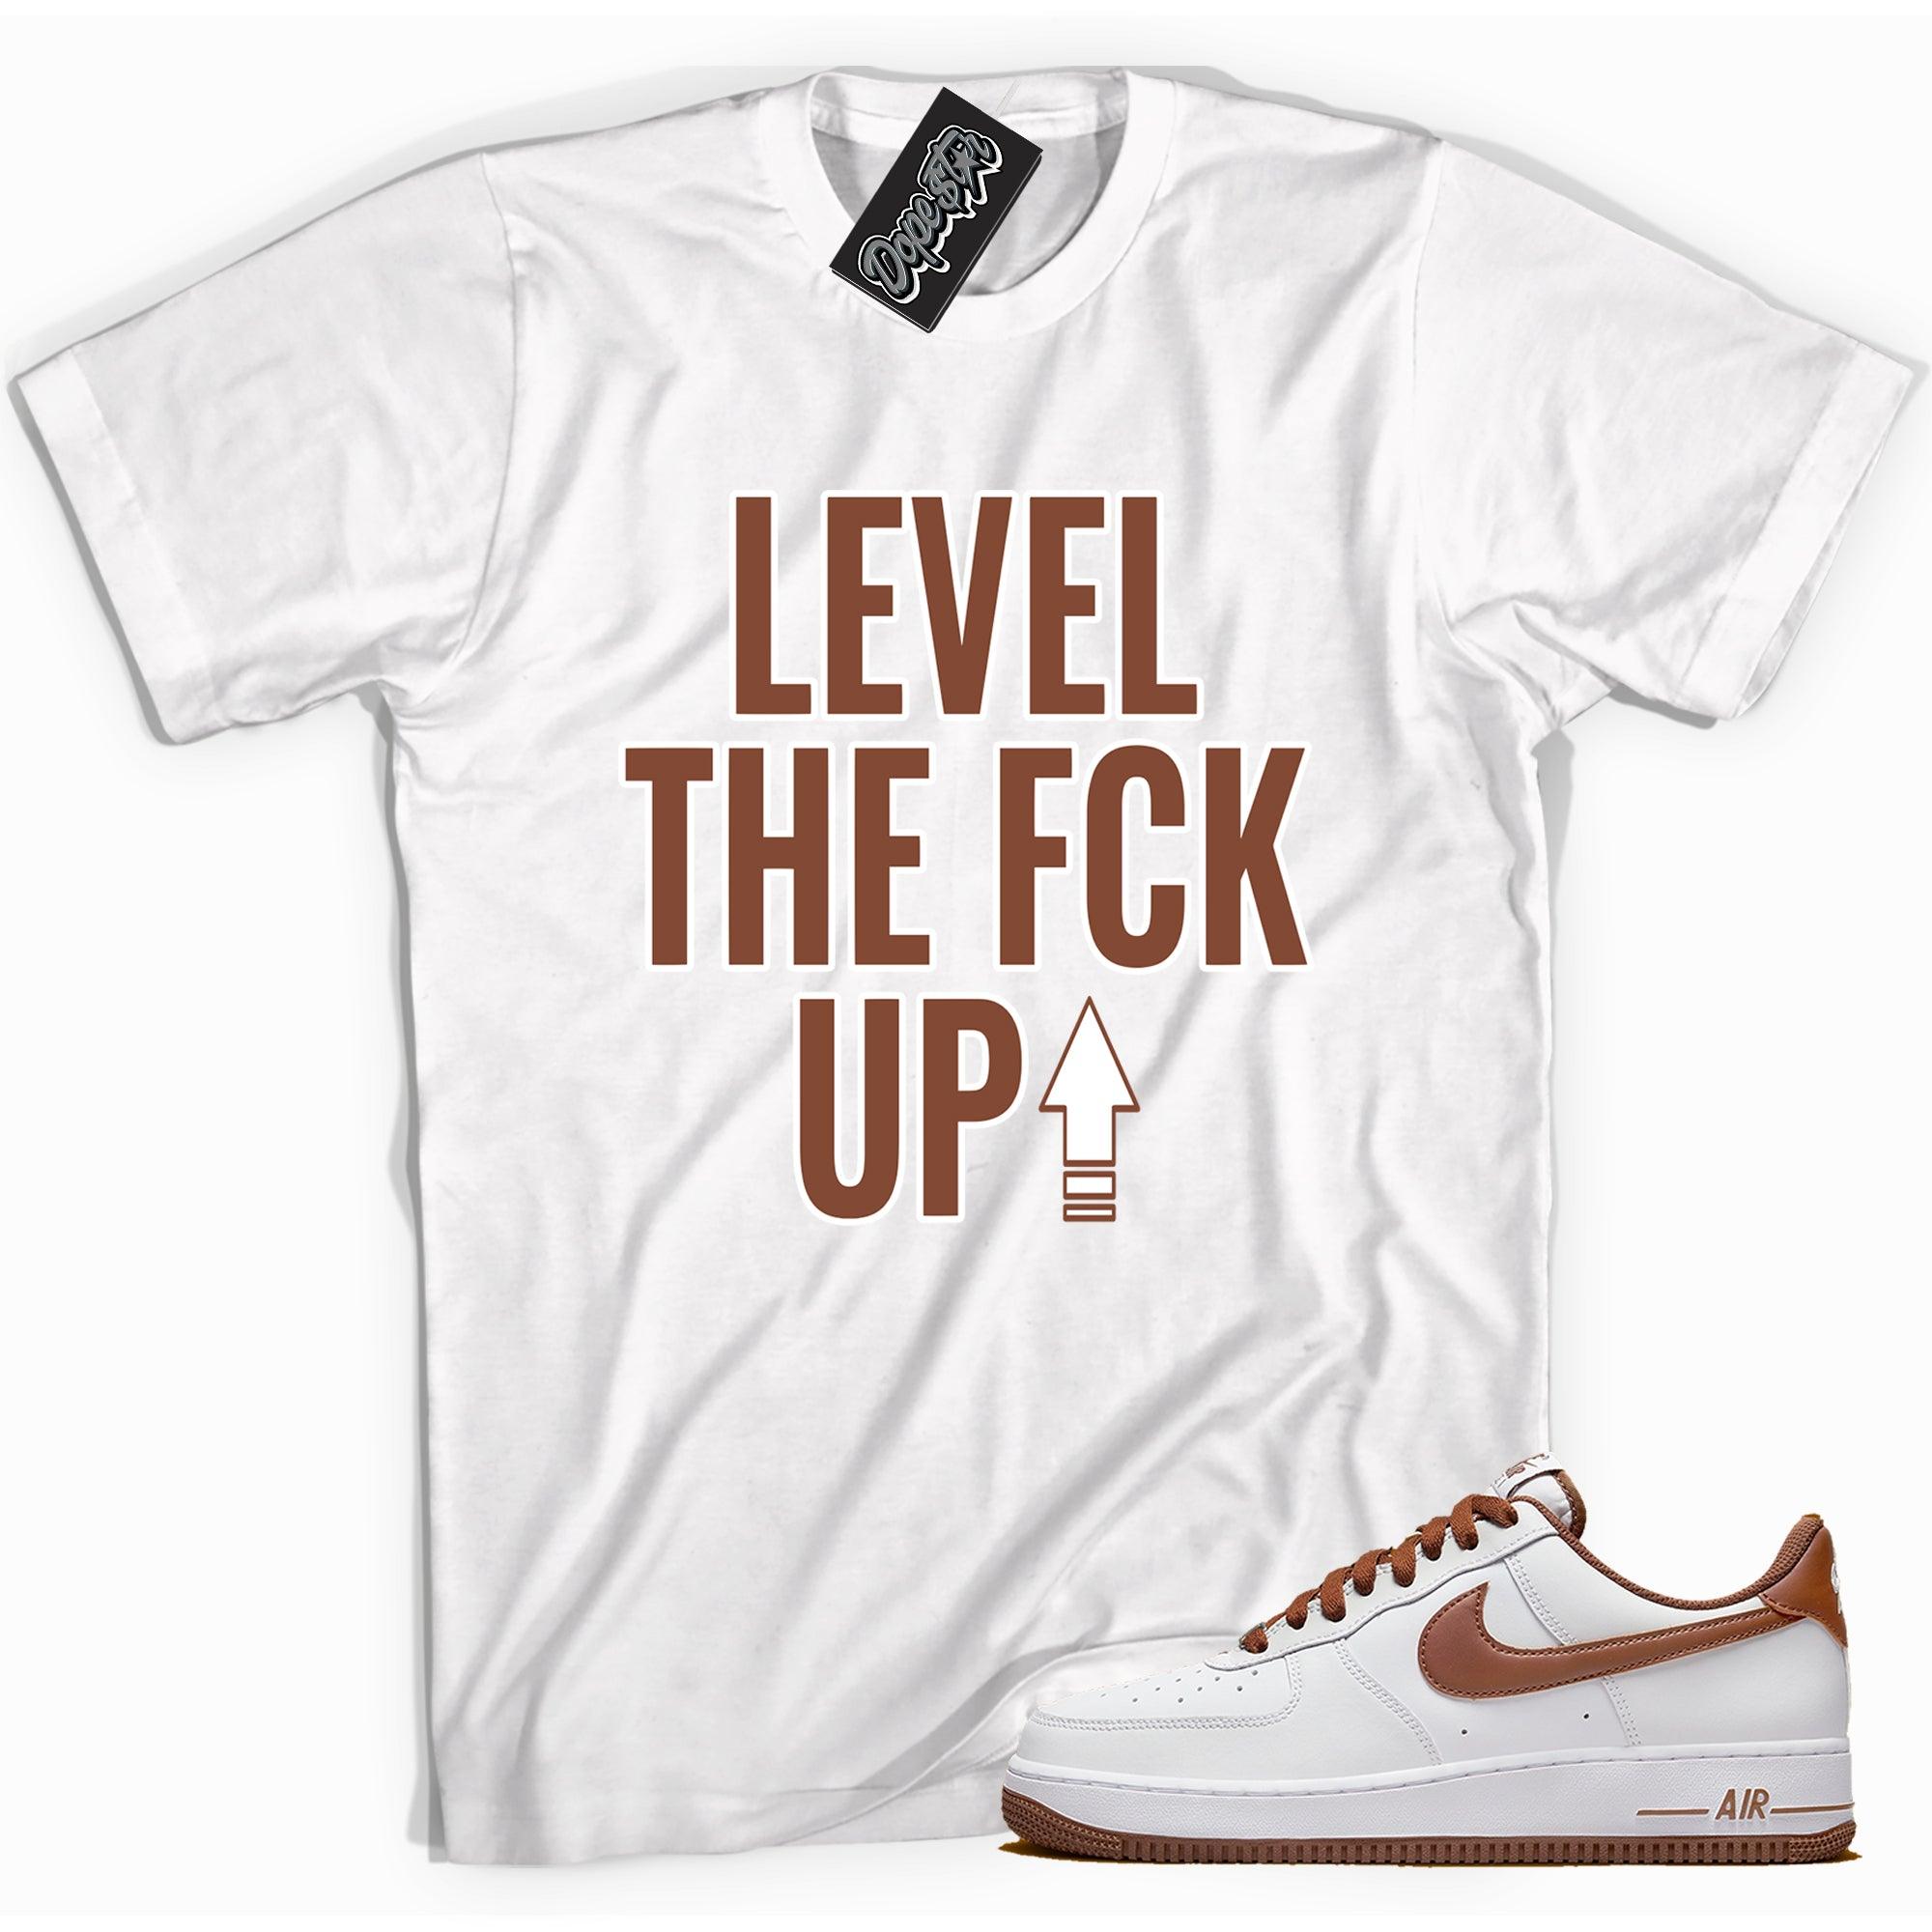 Cool white graphic tee with 'Level Up' print, that perfectly matches Nike Air Force 1 Low Pecan sneakers.